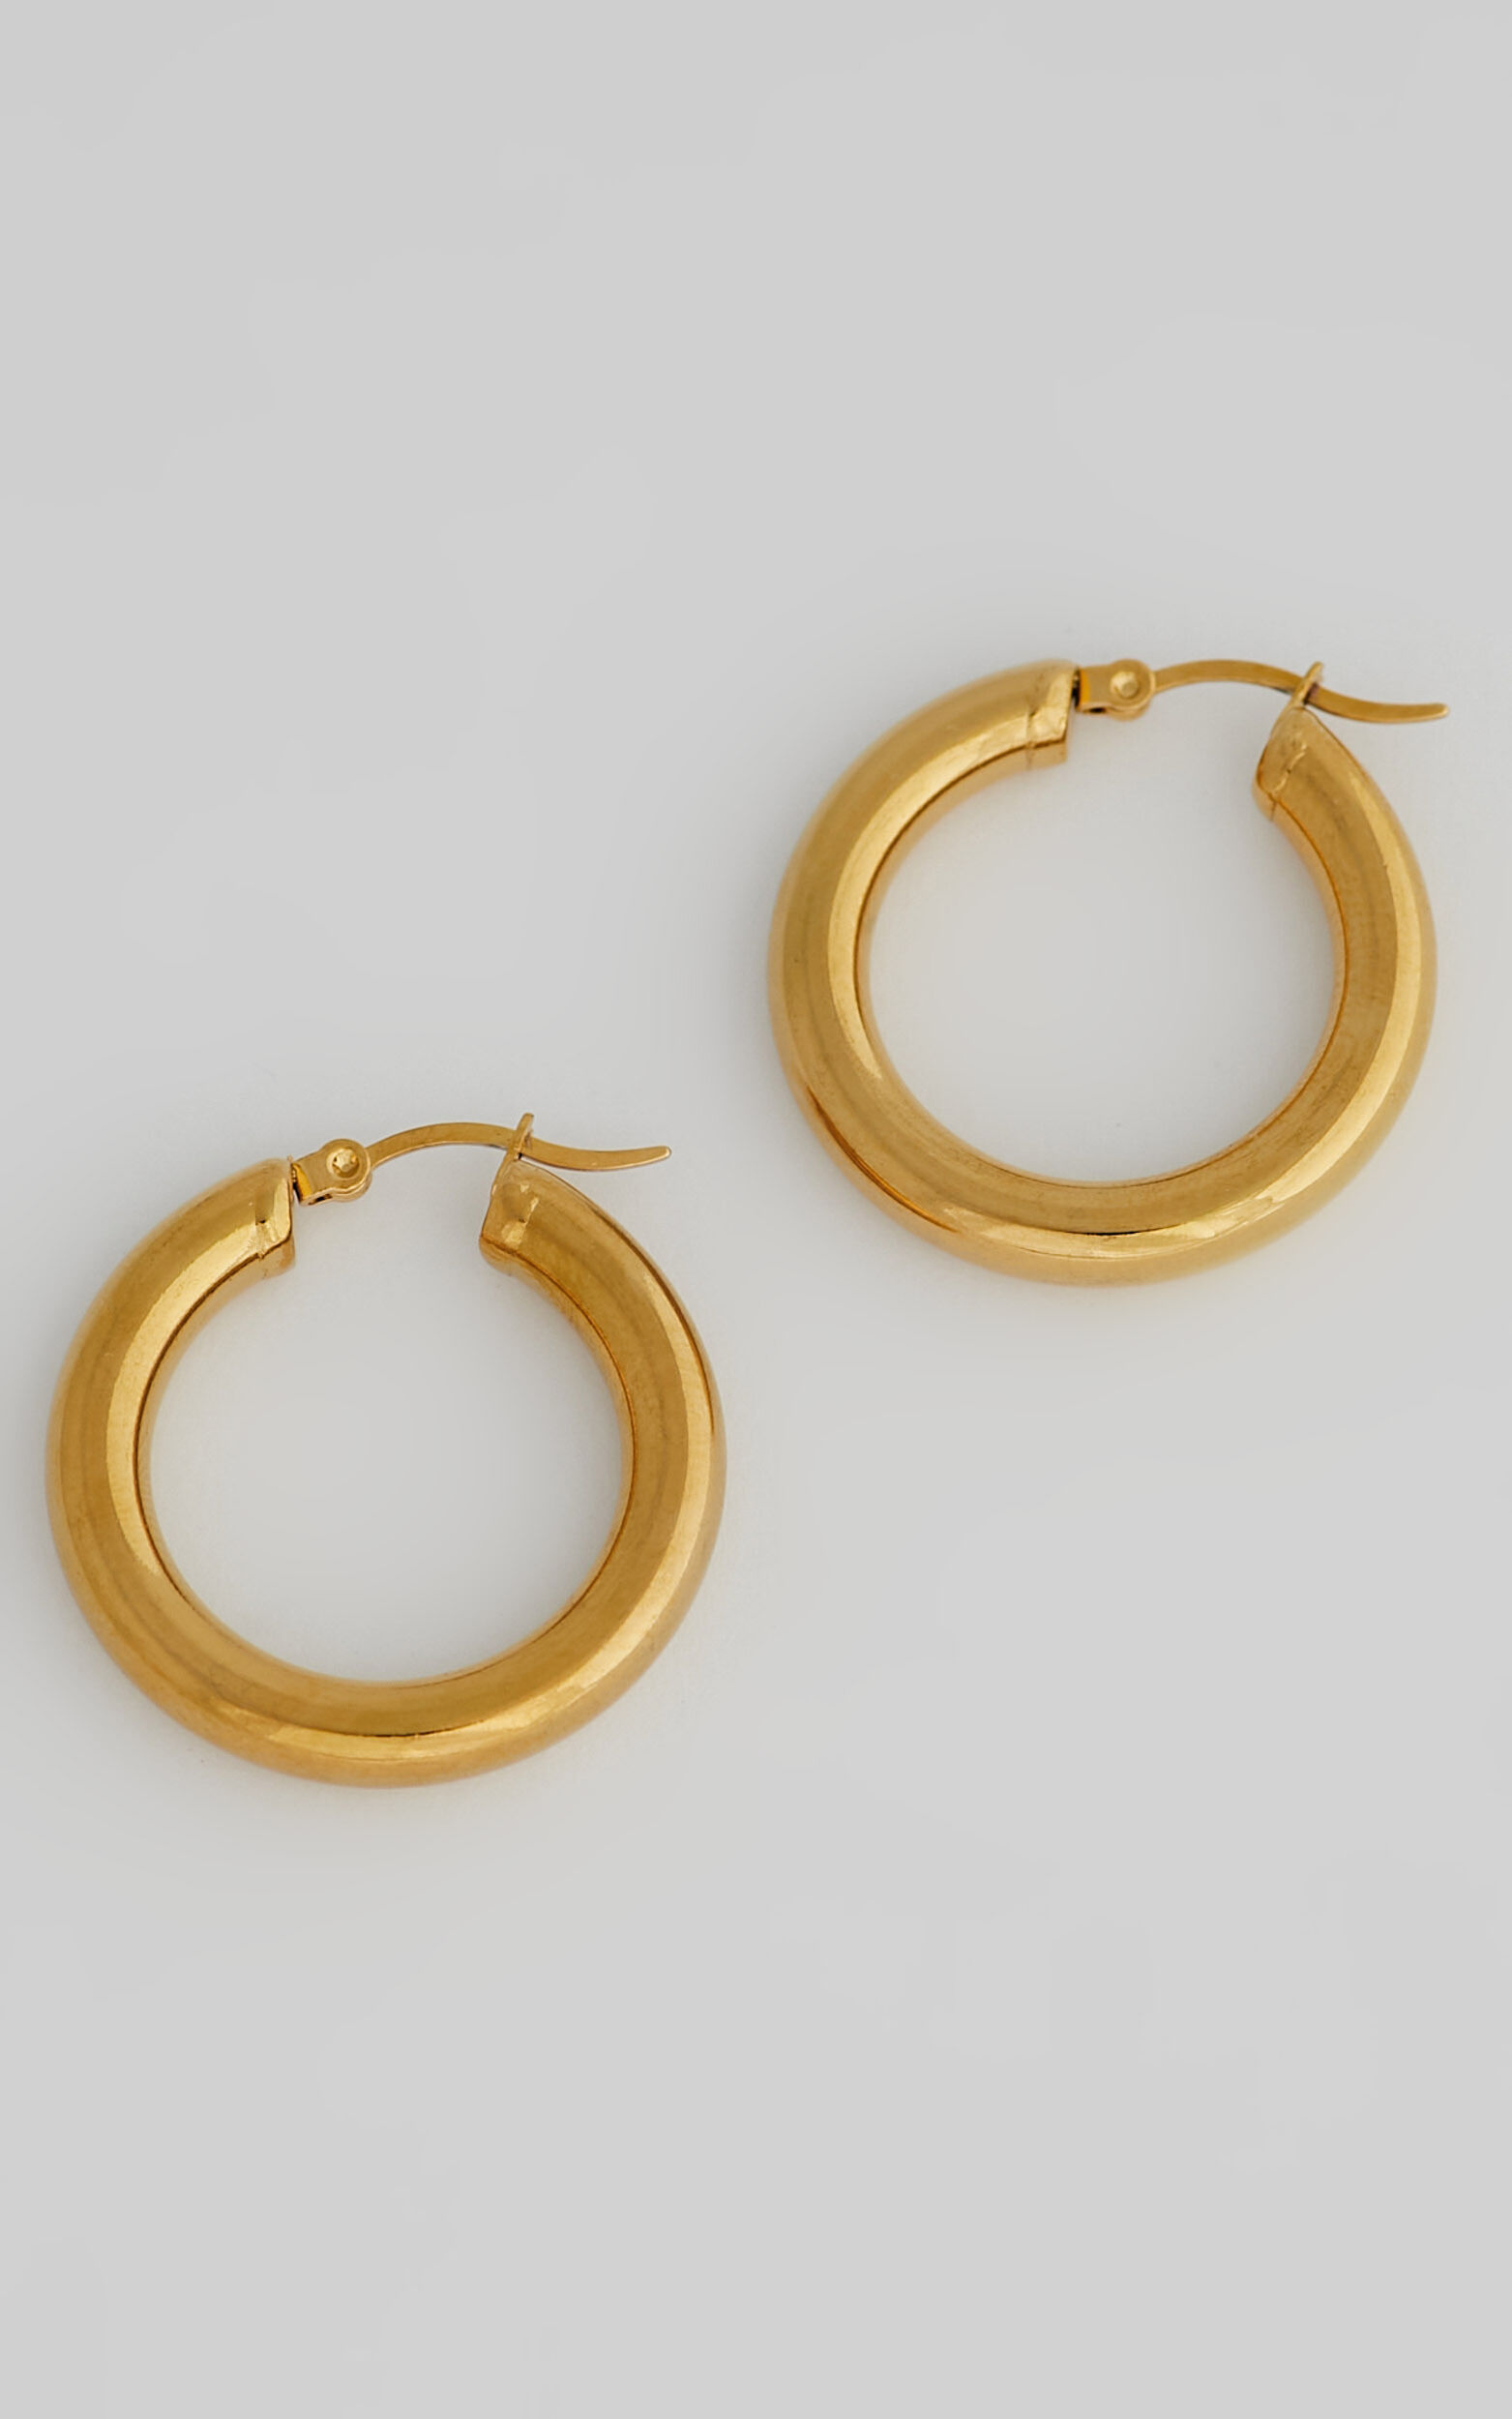 Peta and Jain - Sapphire Earrings in Gold - NoSize, GLD1